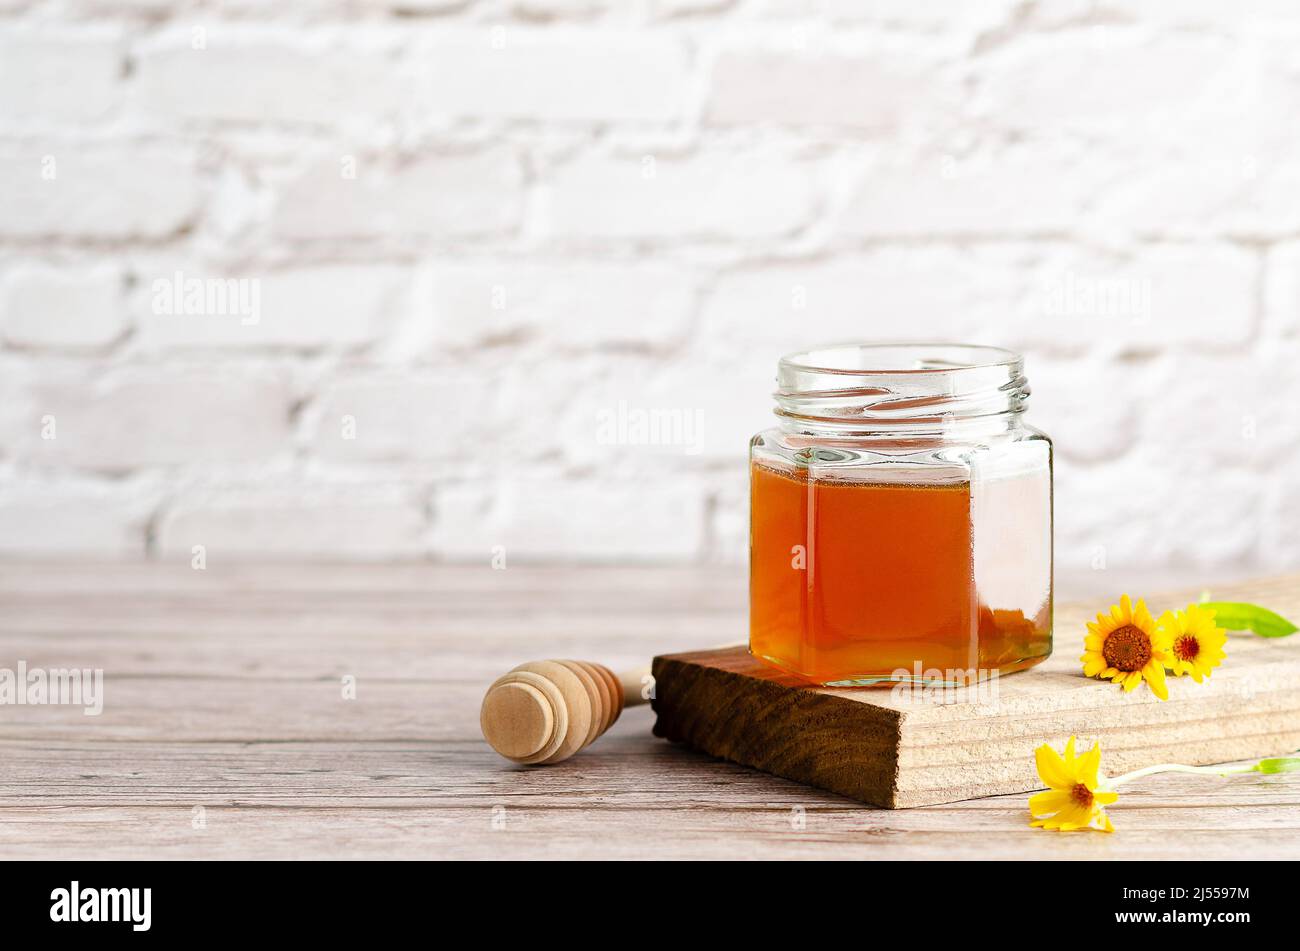 Honey in a jar on a piece of wood, a honey dipper and some marigolds, on a wooden table and a white wall with copy space. Stock Photo